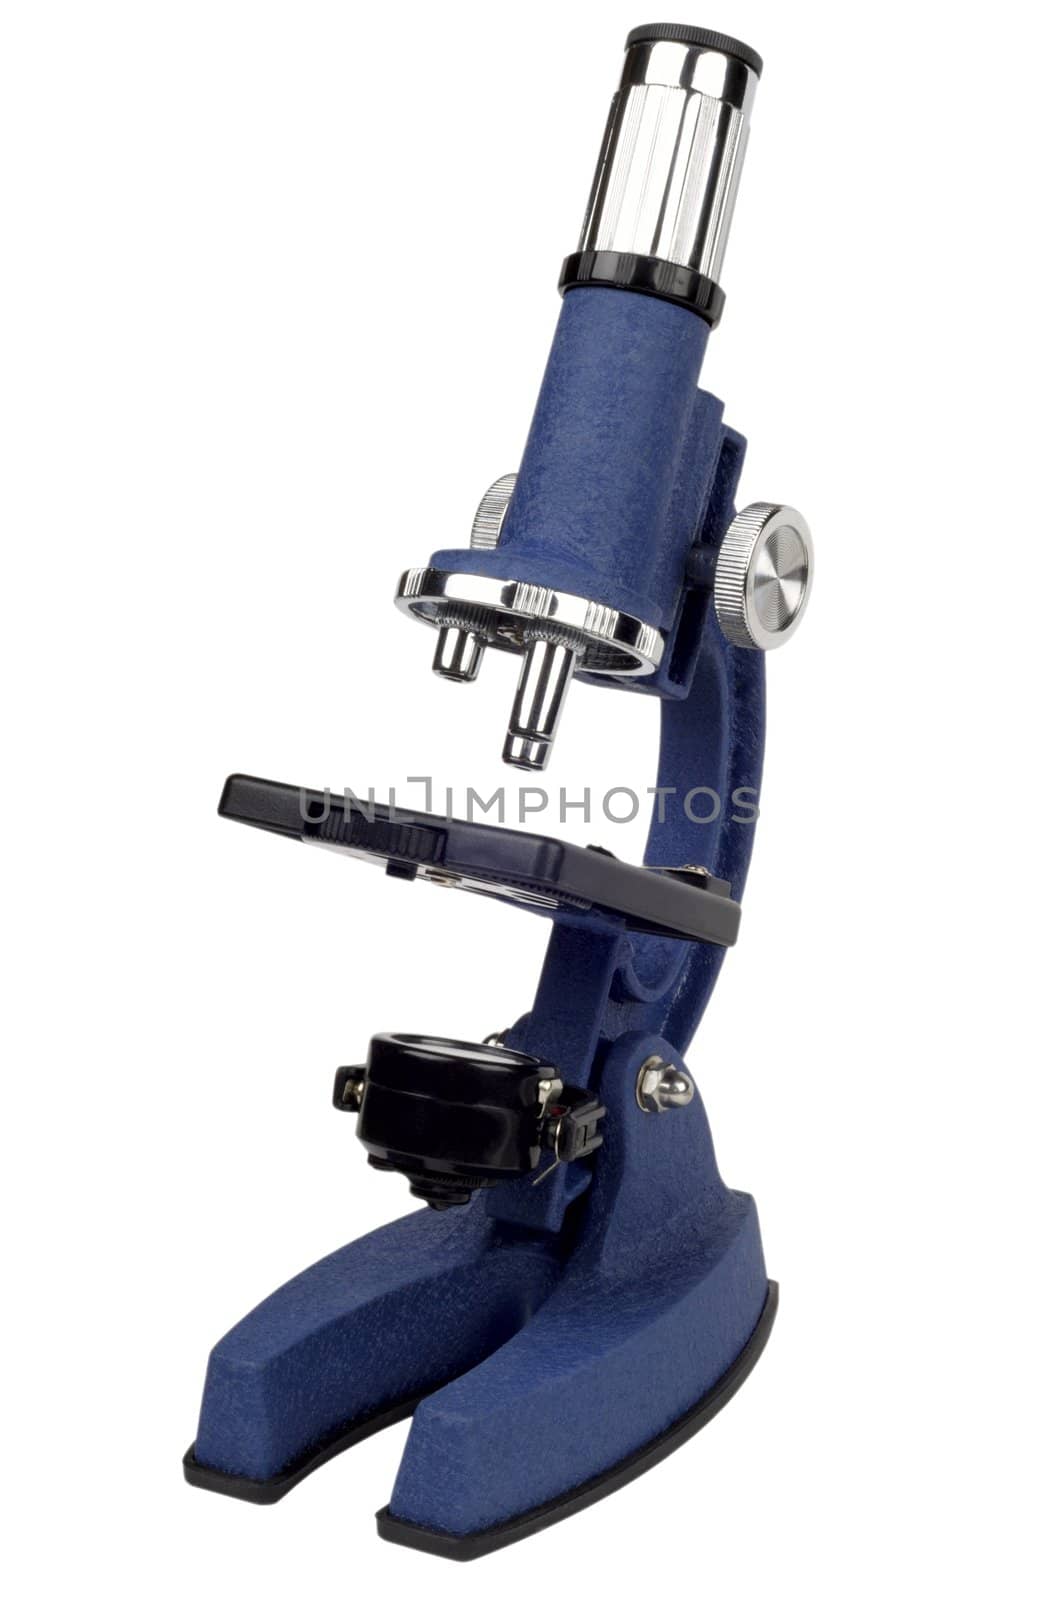 academic microscope isolated on a white background